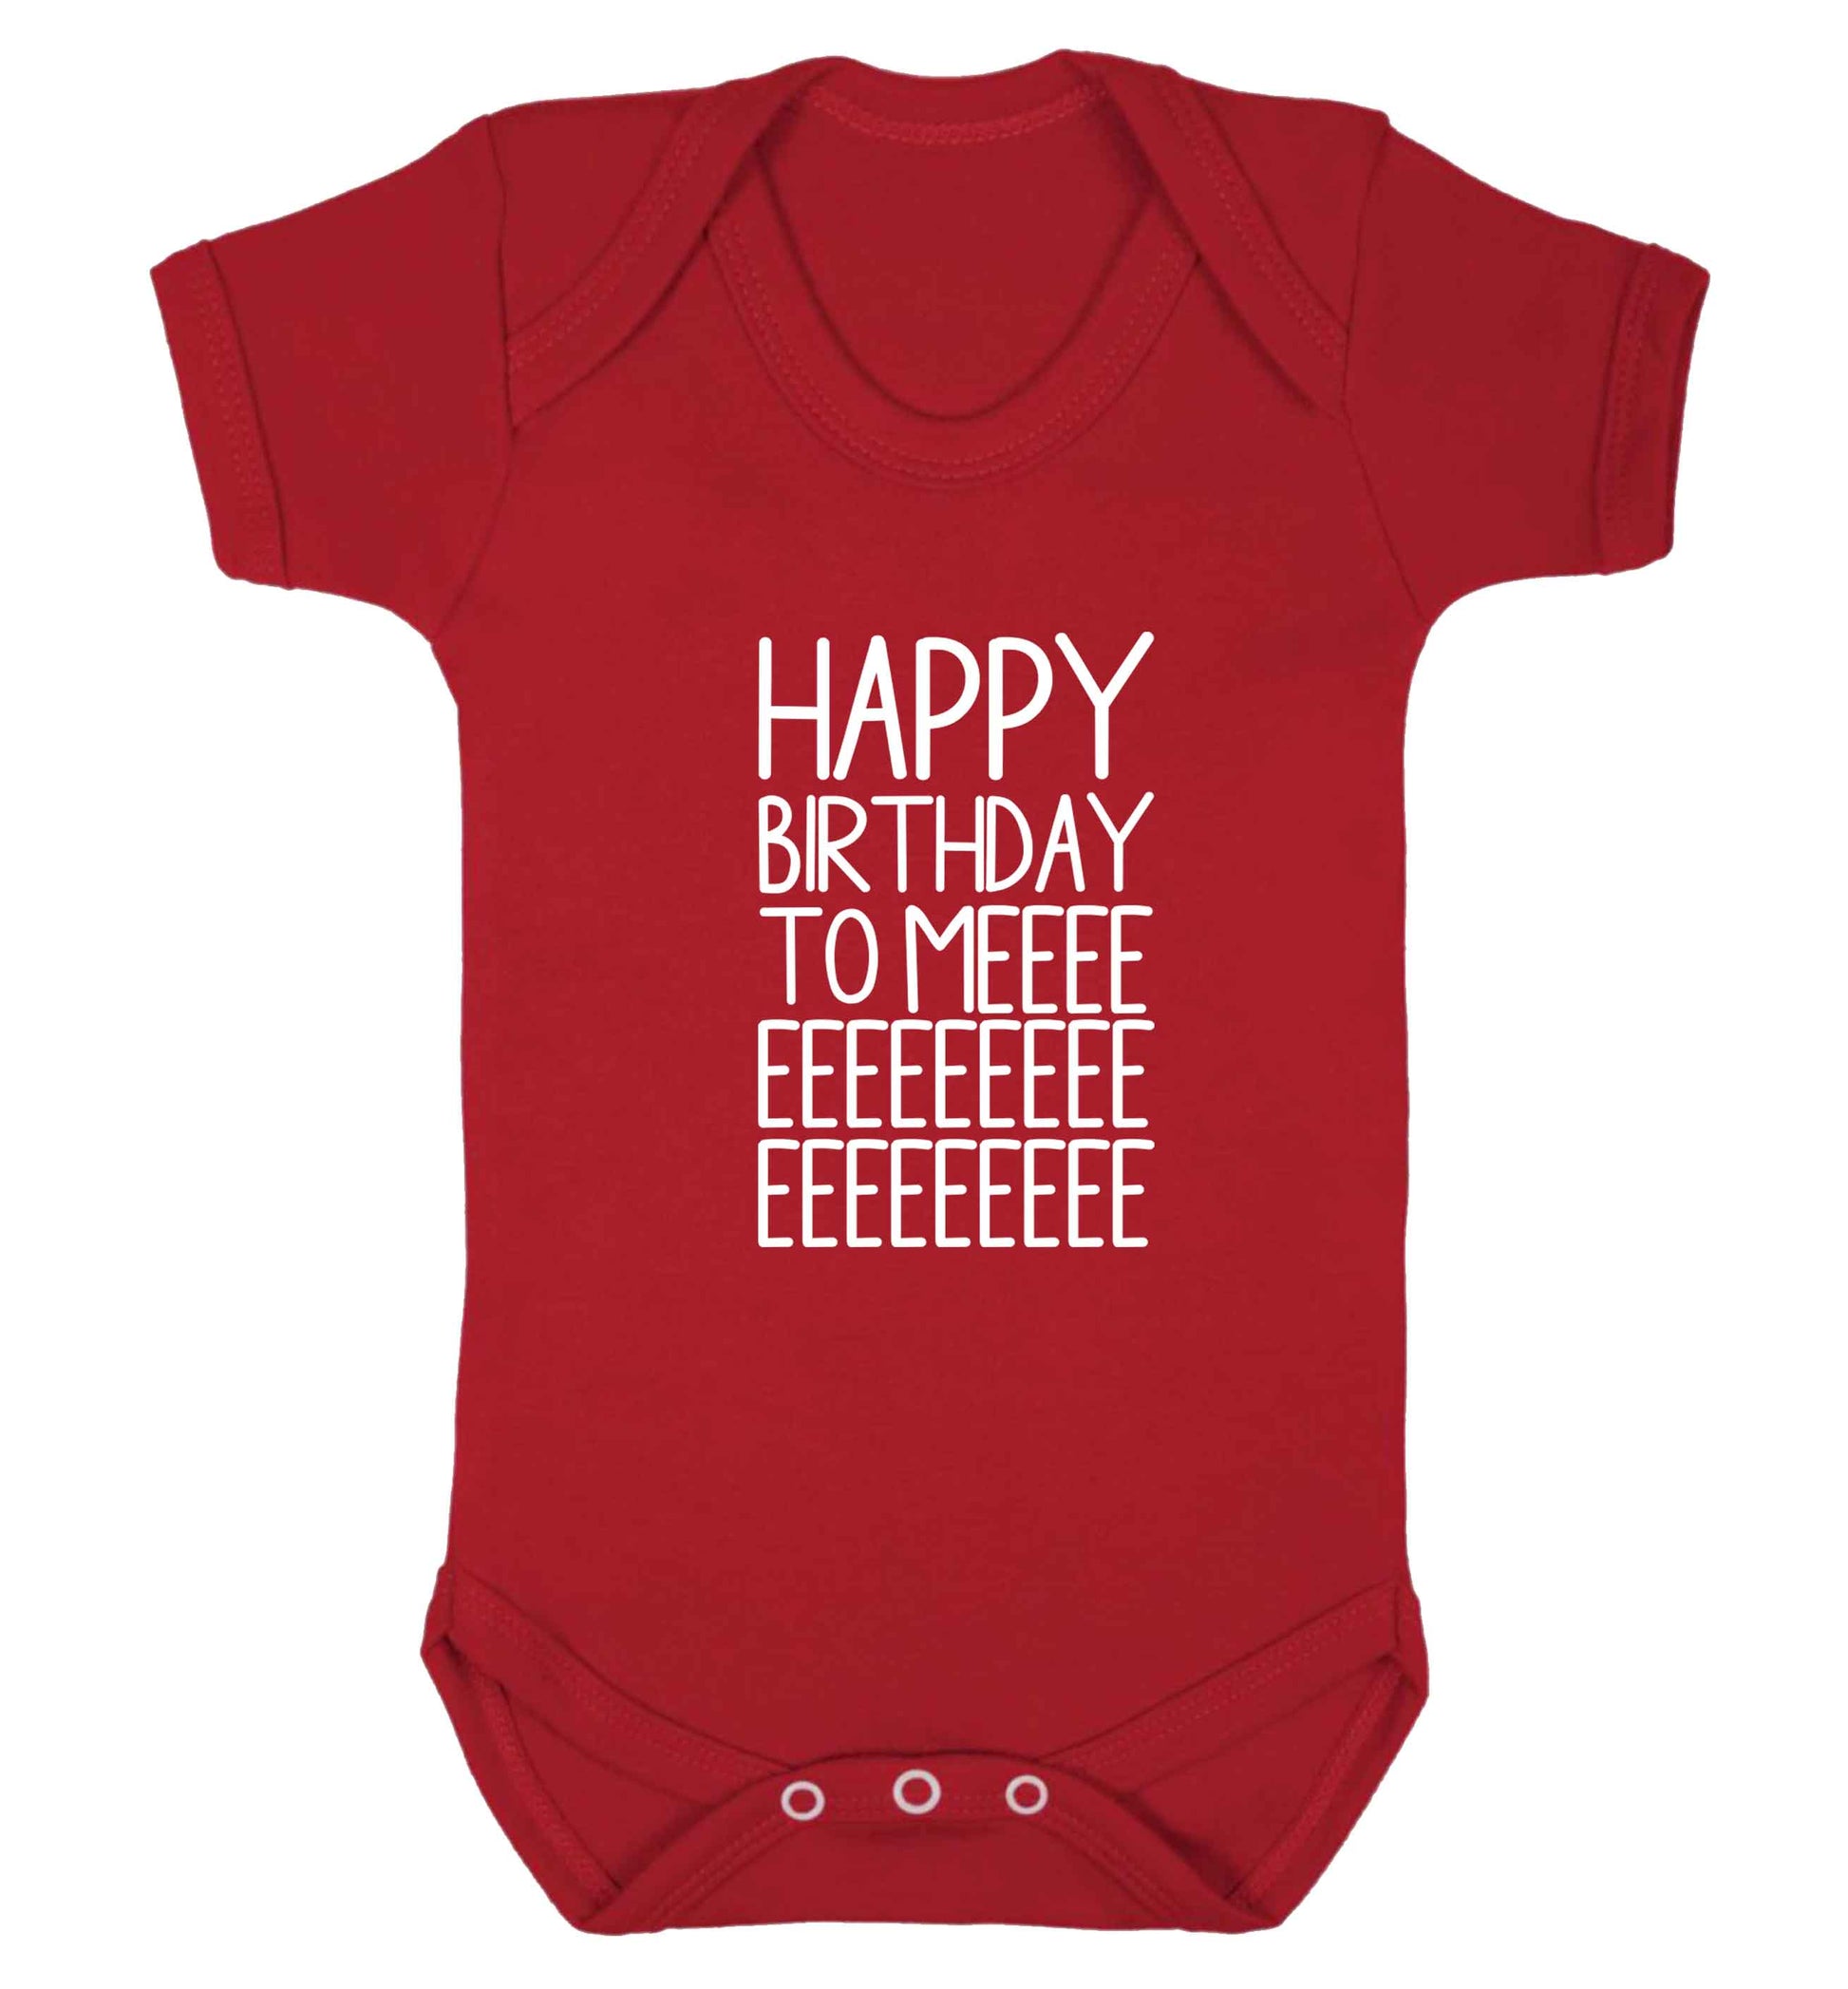 Happy birthday to me baby vest red 18-24 months